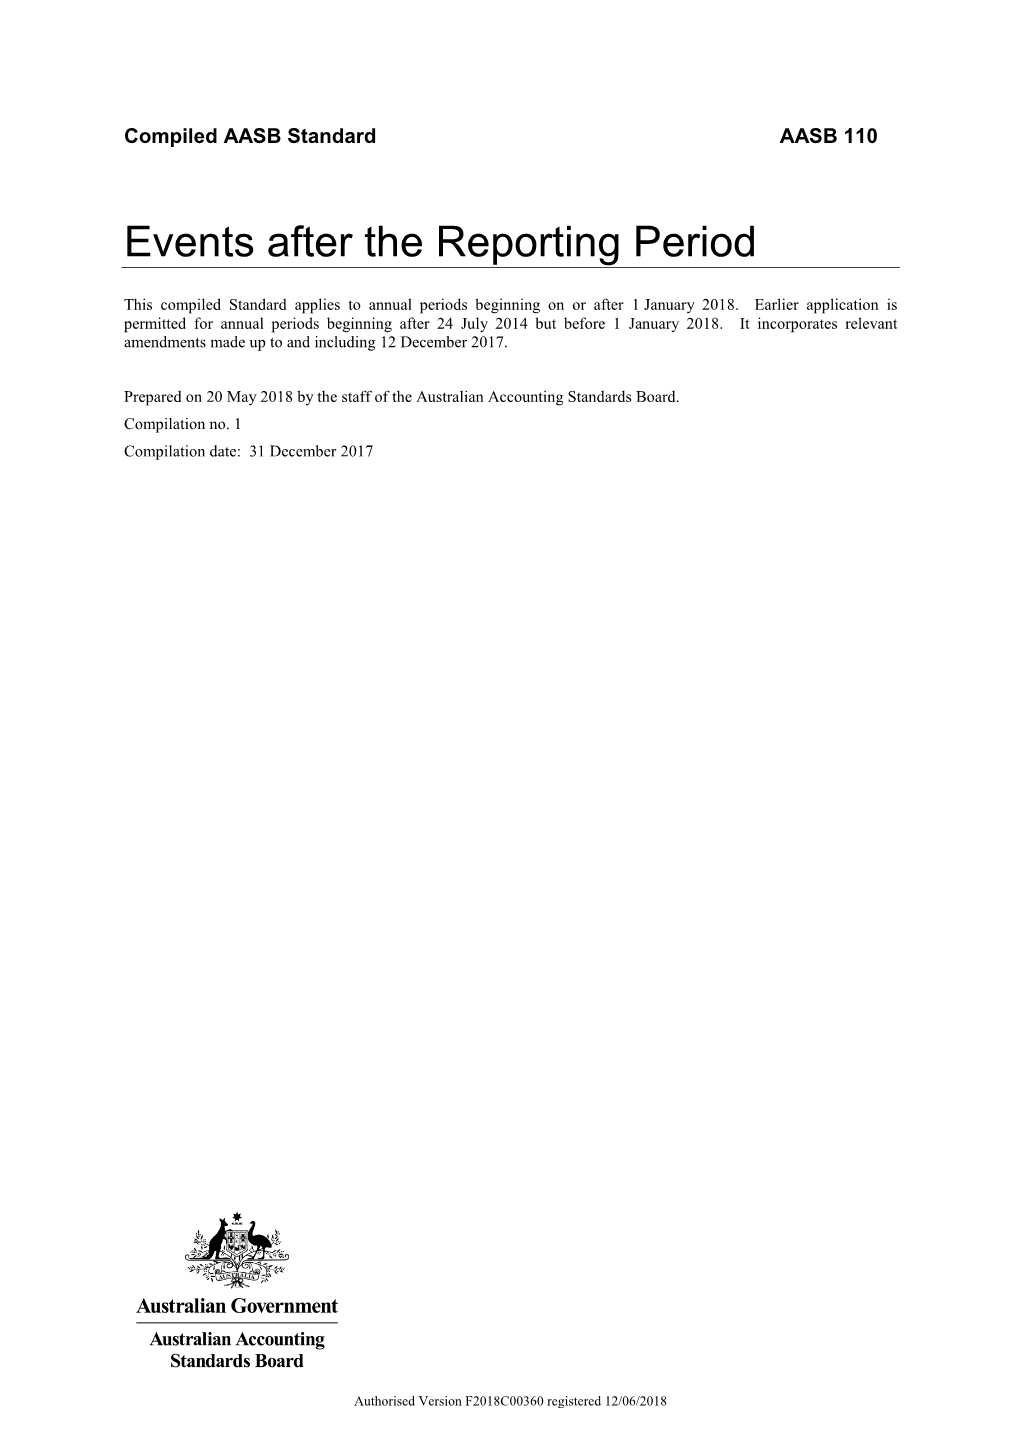 Aasb 110 Events After the Reporting Period